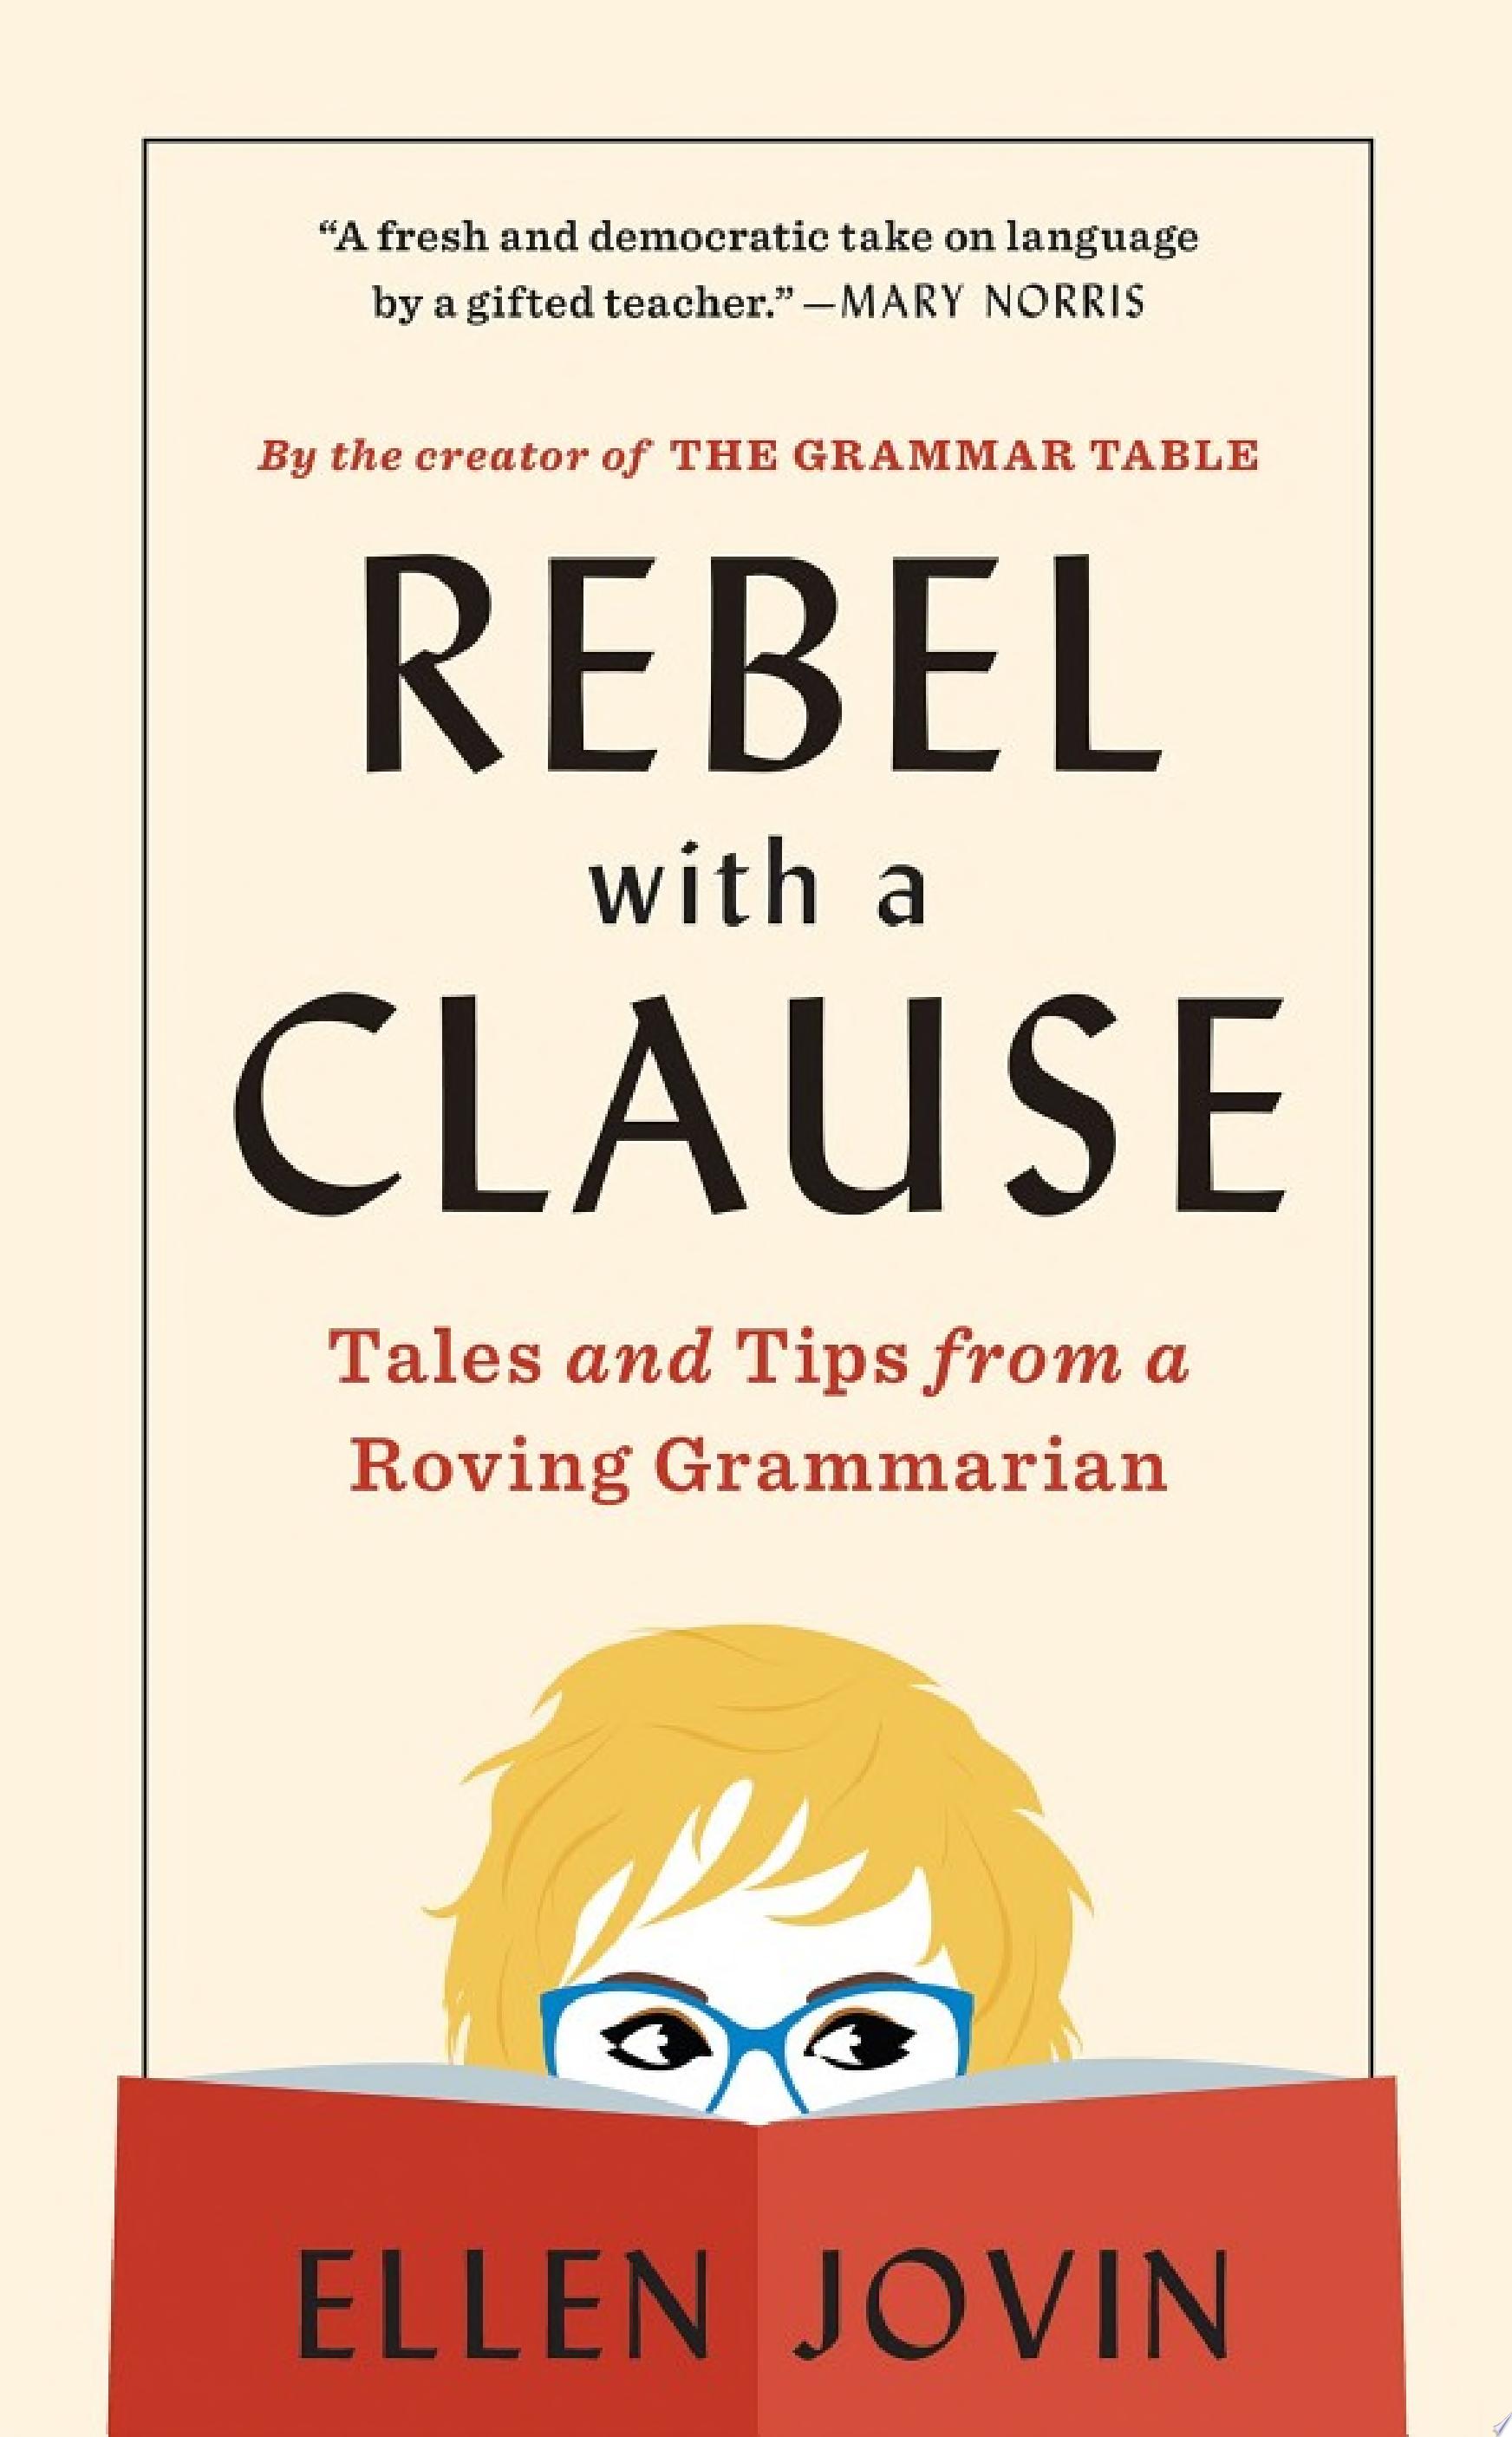 Image for "Rebel with a Clause"